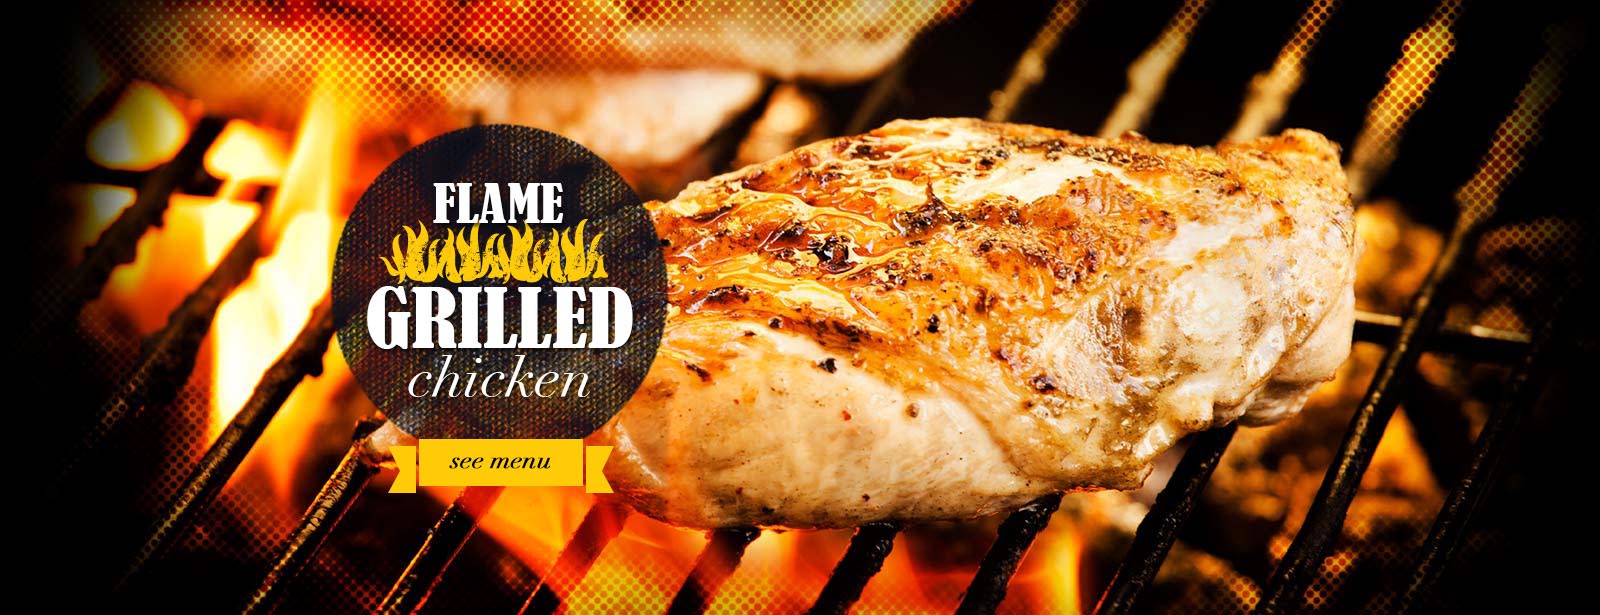 Ranch One Flame Grilled Chicken